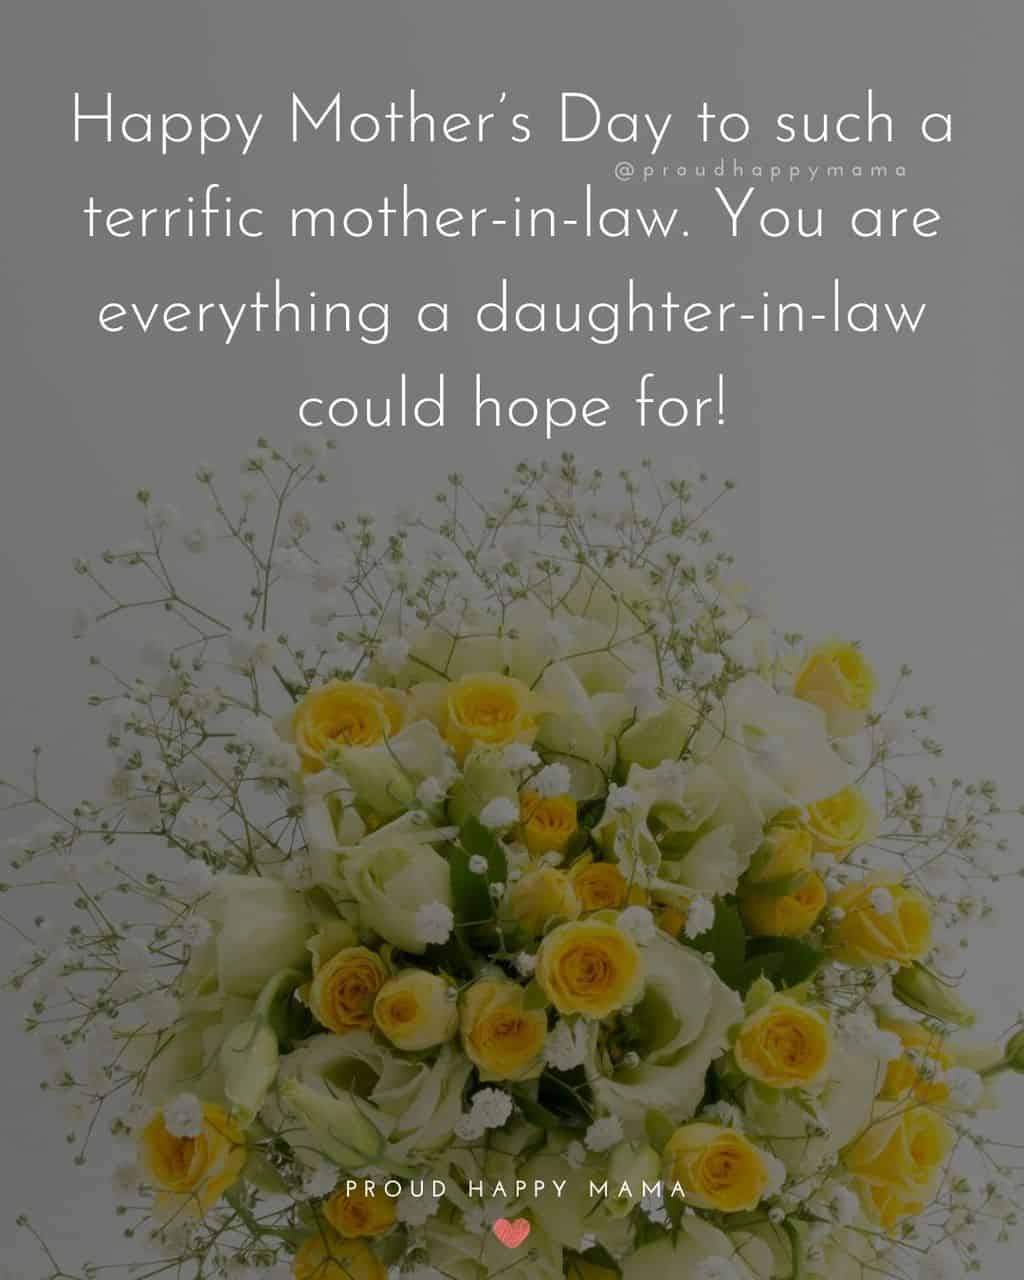 Happy Mothers Day Quotes For Mother In Law - Happy Mother’s Day to such a terrific mother-in-law. You are everything a daughter-in-law